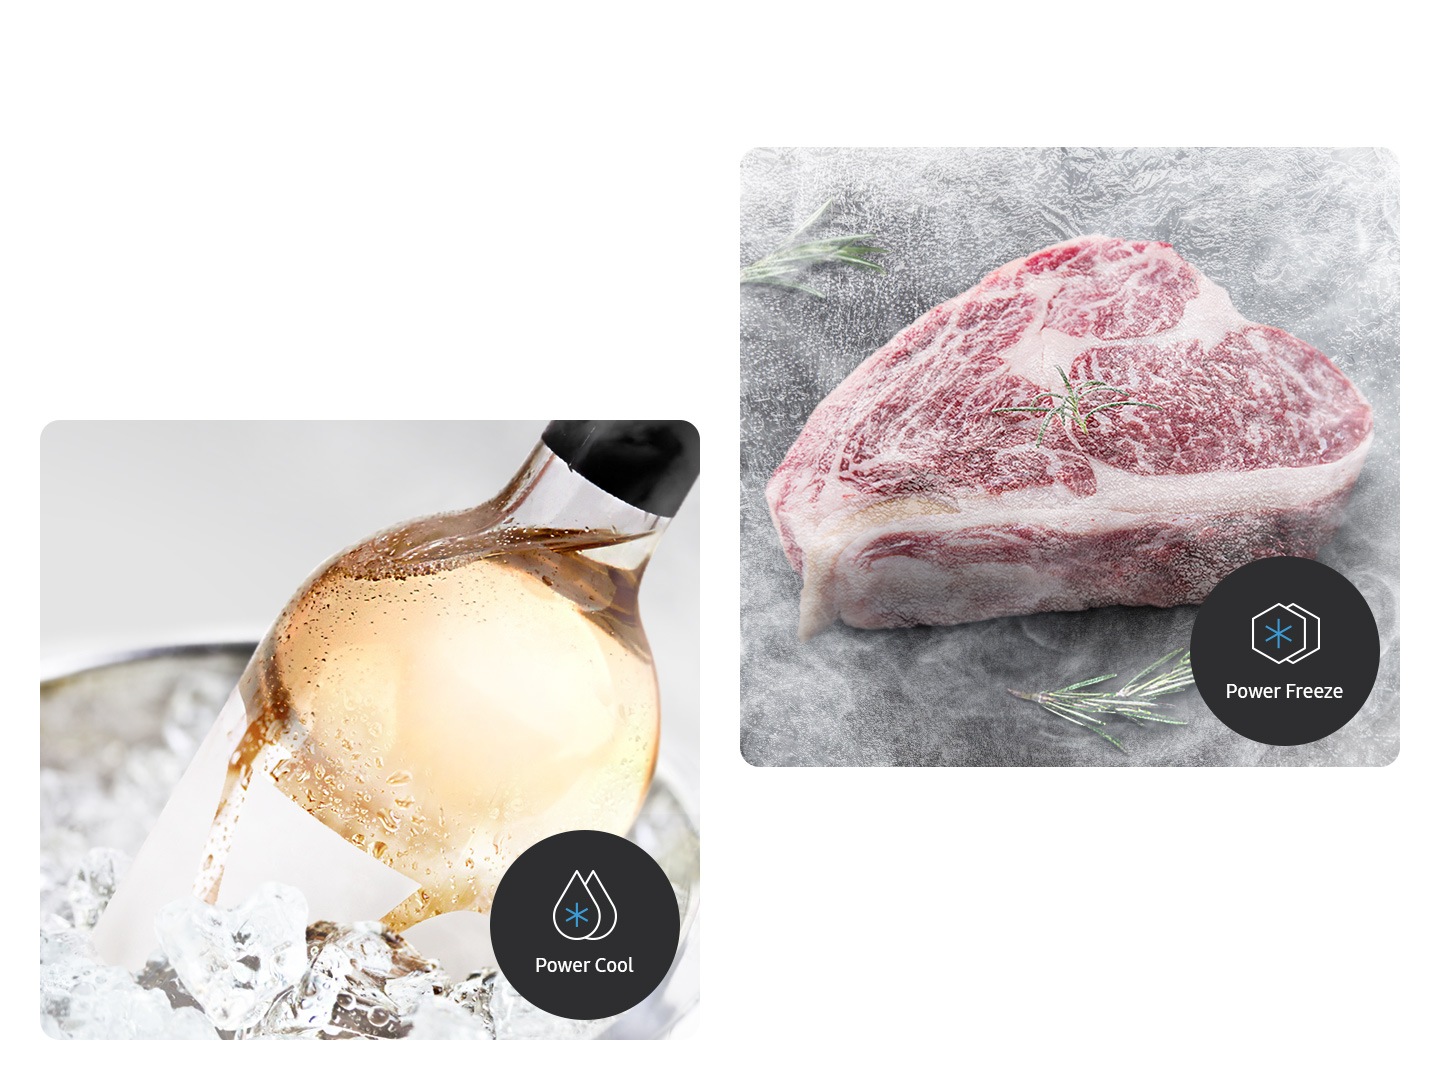 A bottle of white wine is being chilled in ice with Power Cool, and a steak is being frozen quickly with Power Freeze.